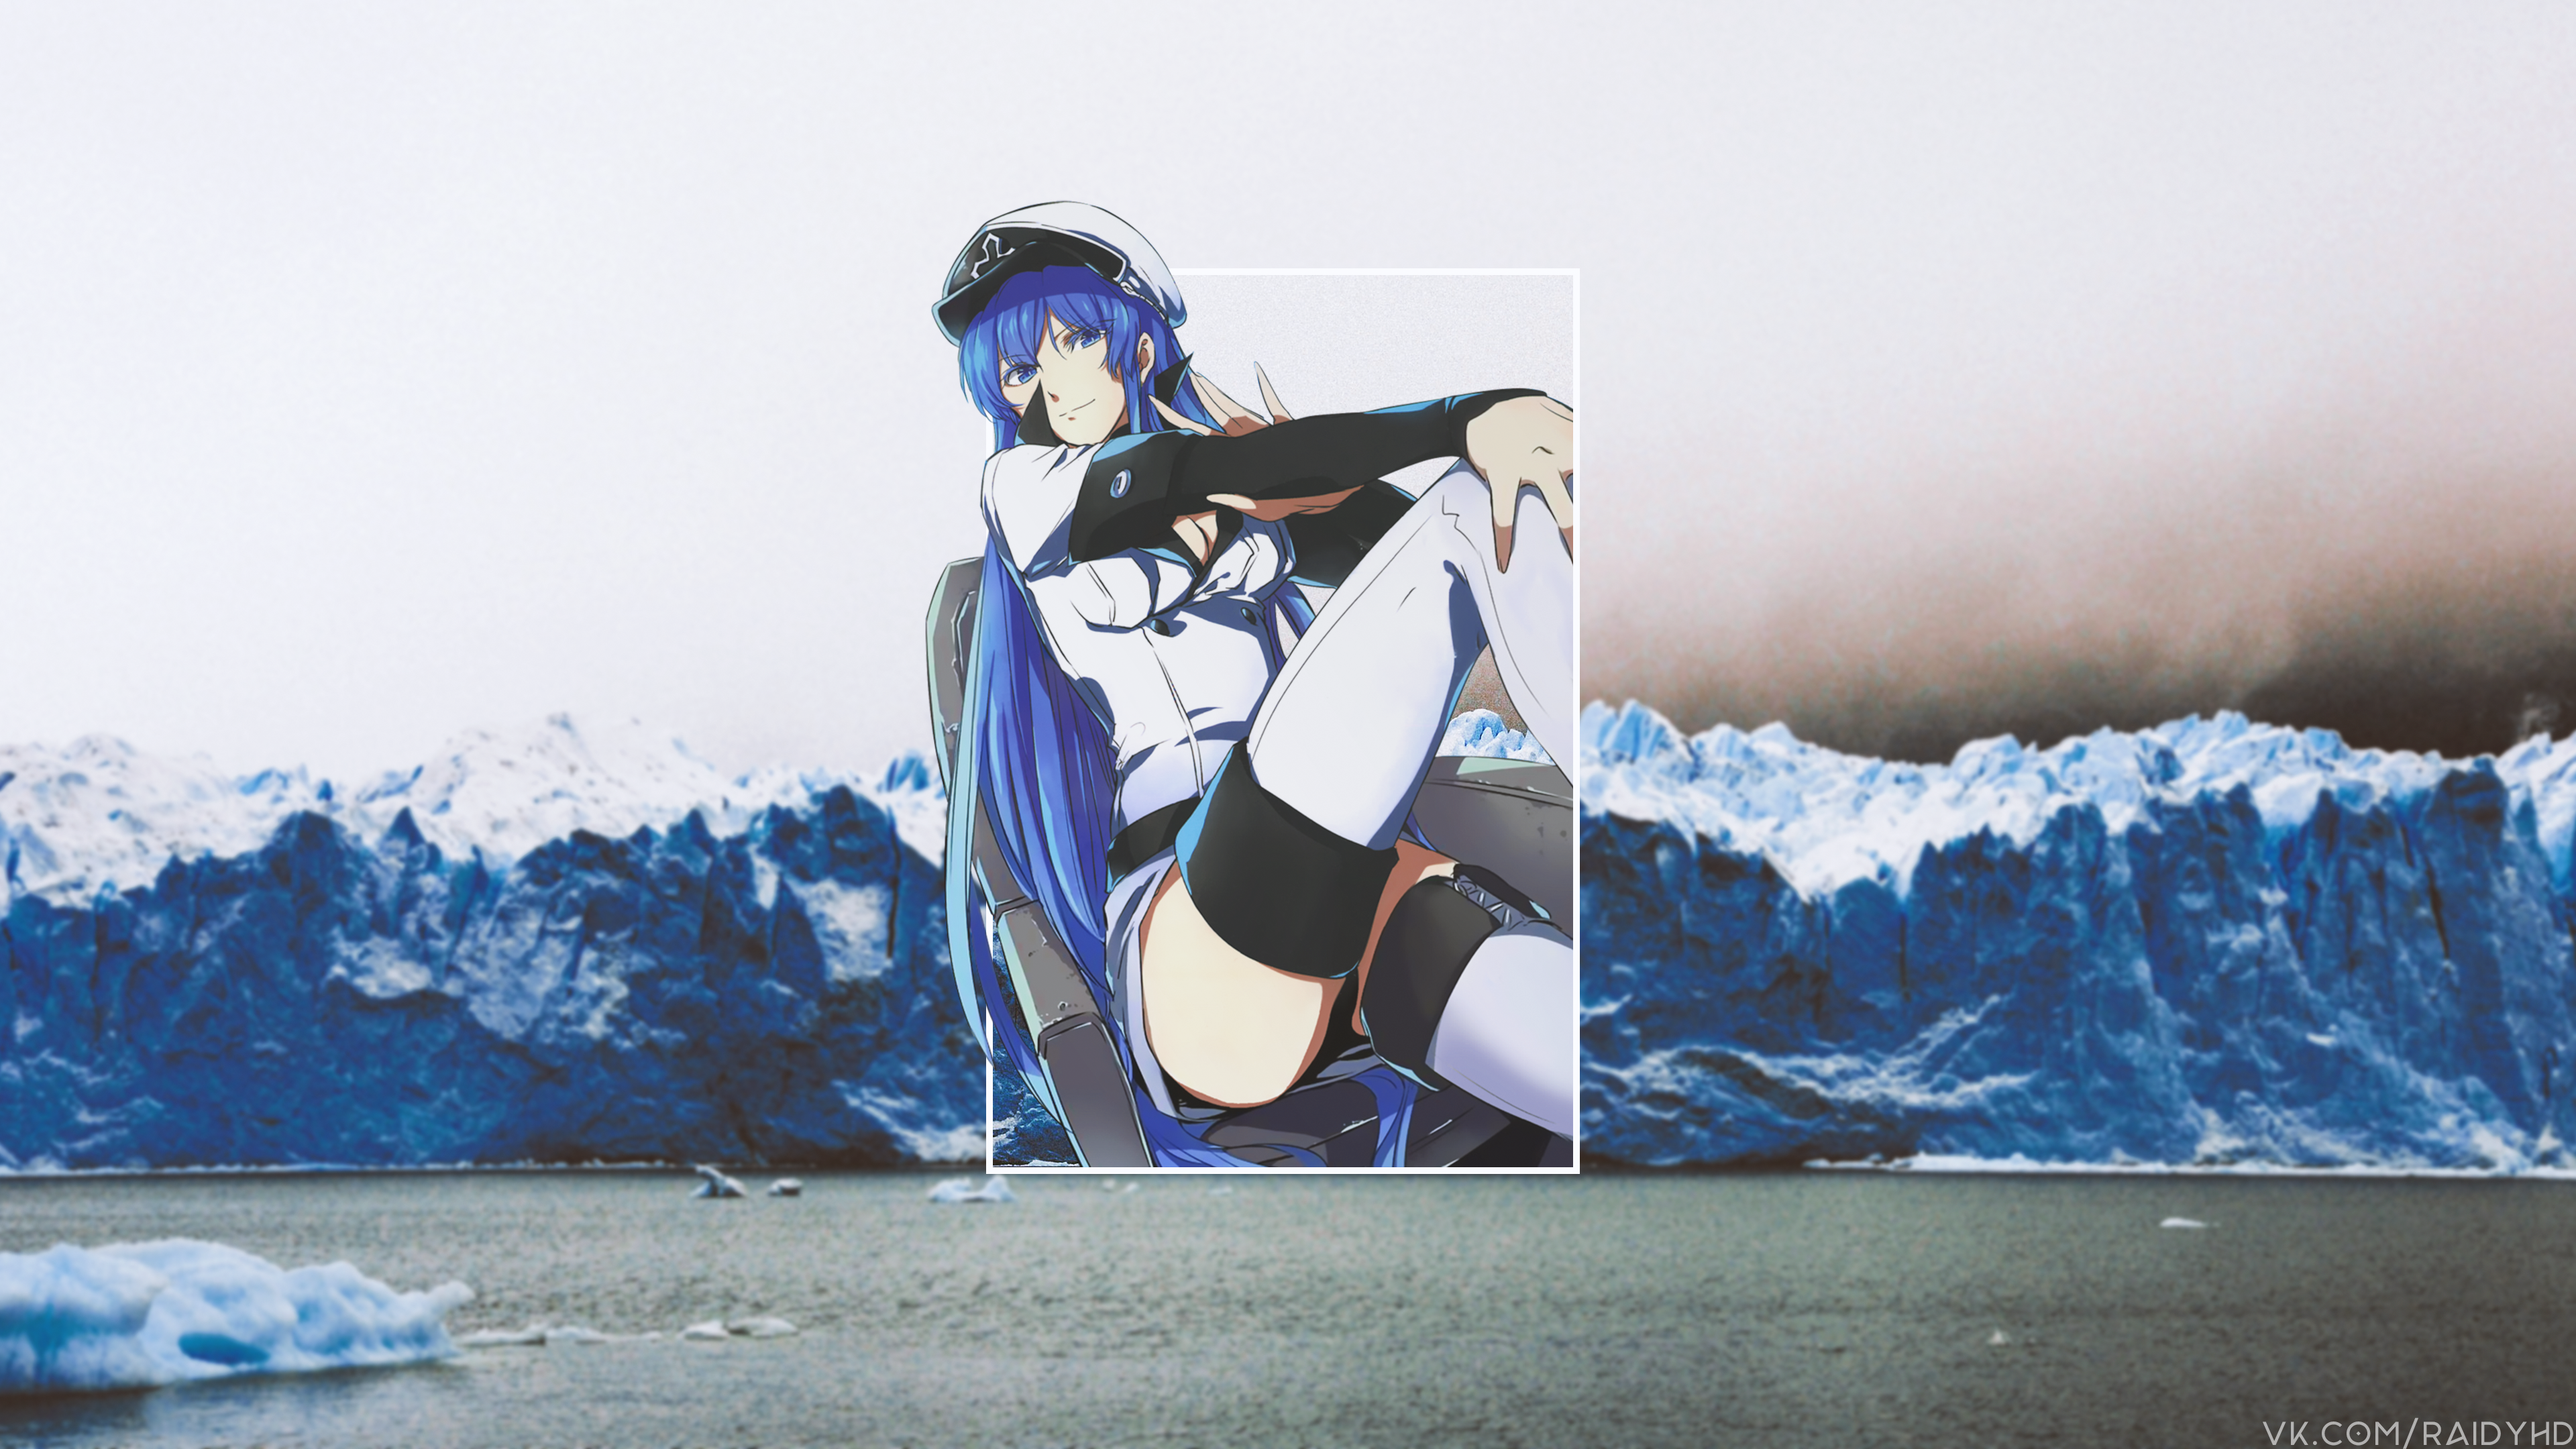 Anime 3840x2160 anime anime girls picture-in-picture cold Esdeath (Akame Ga Kill!) Akame ga Kill!